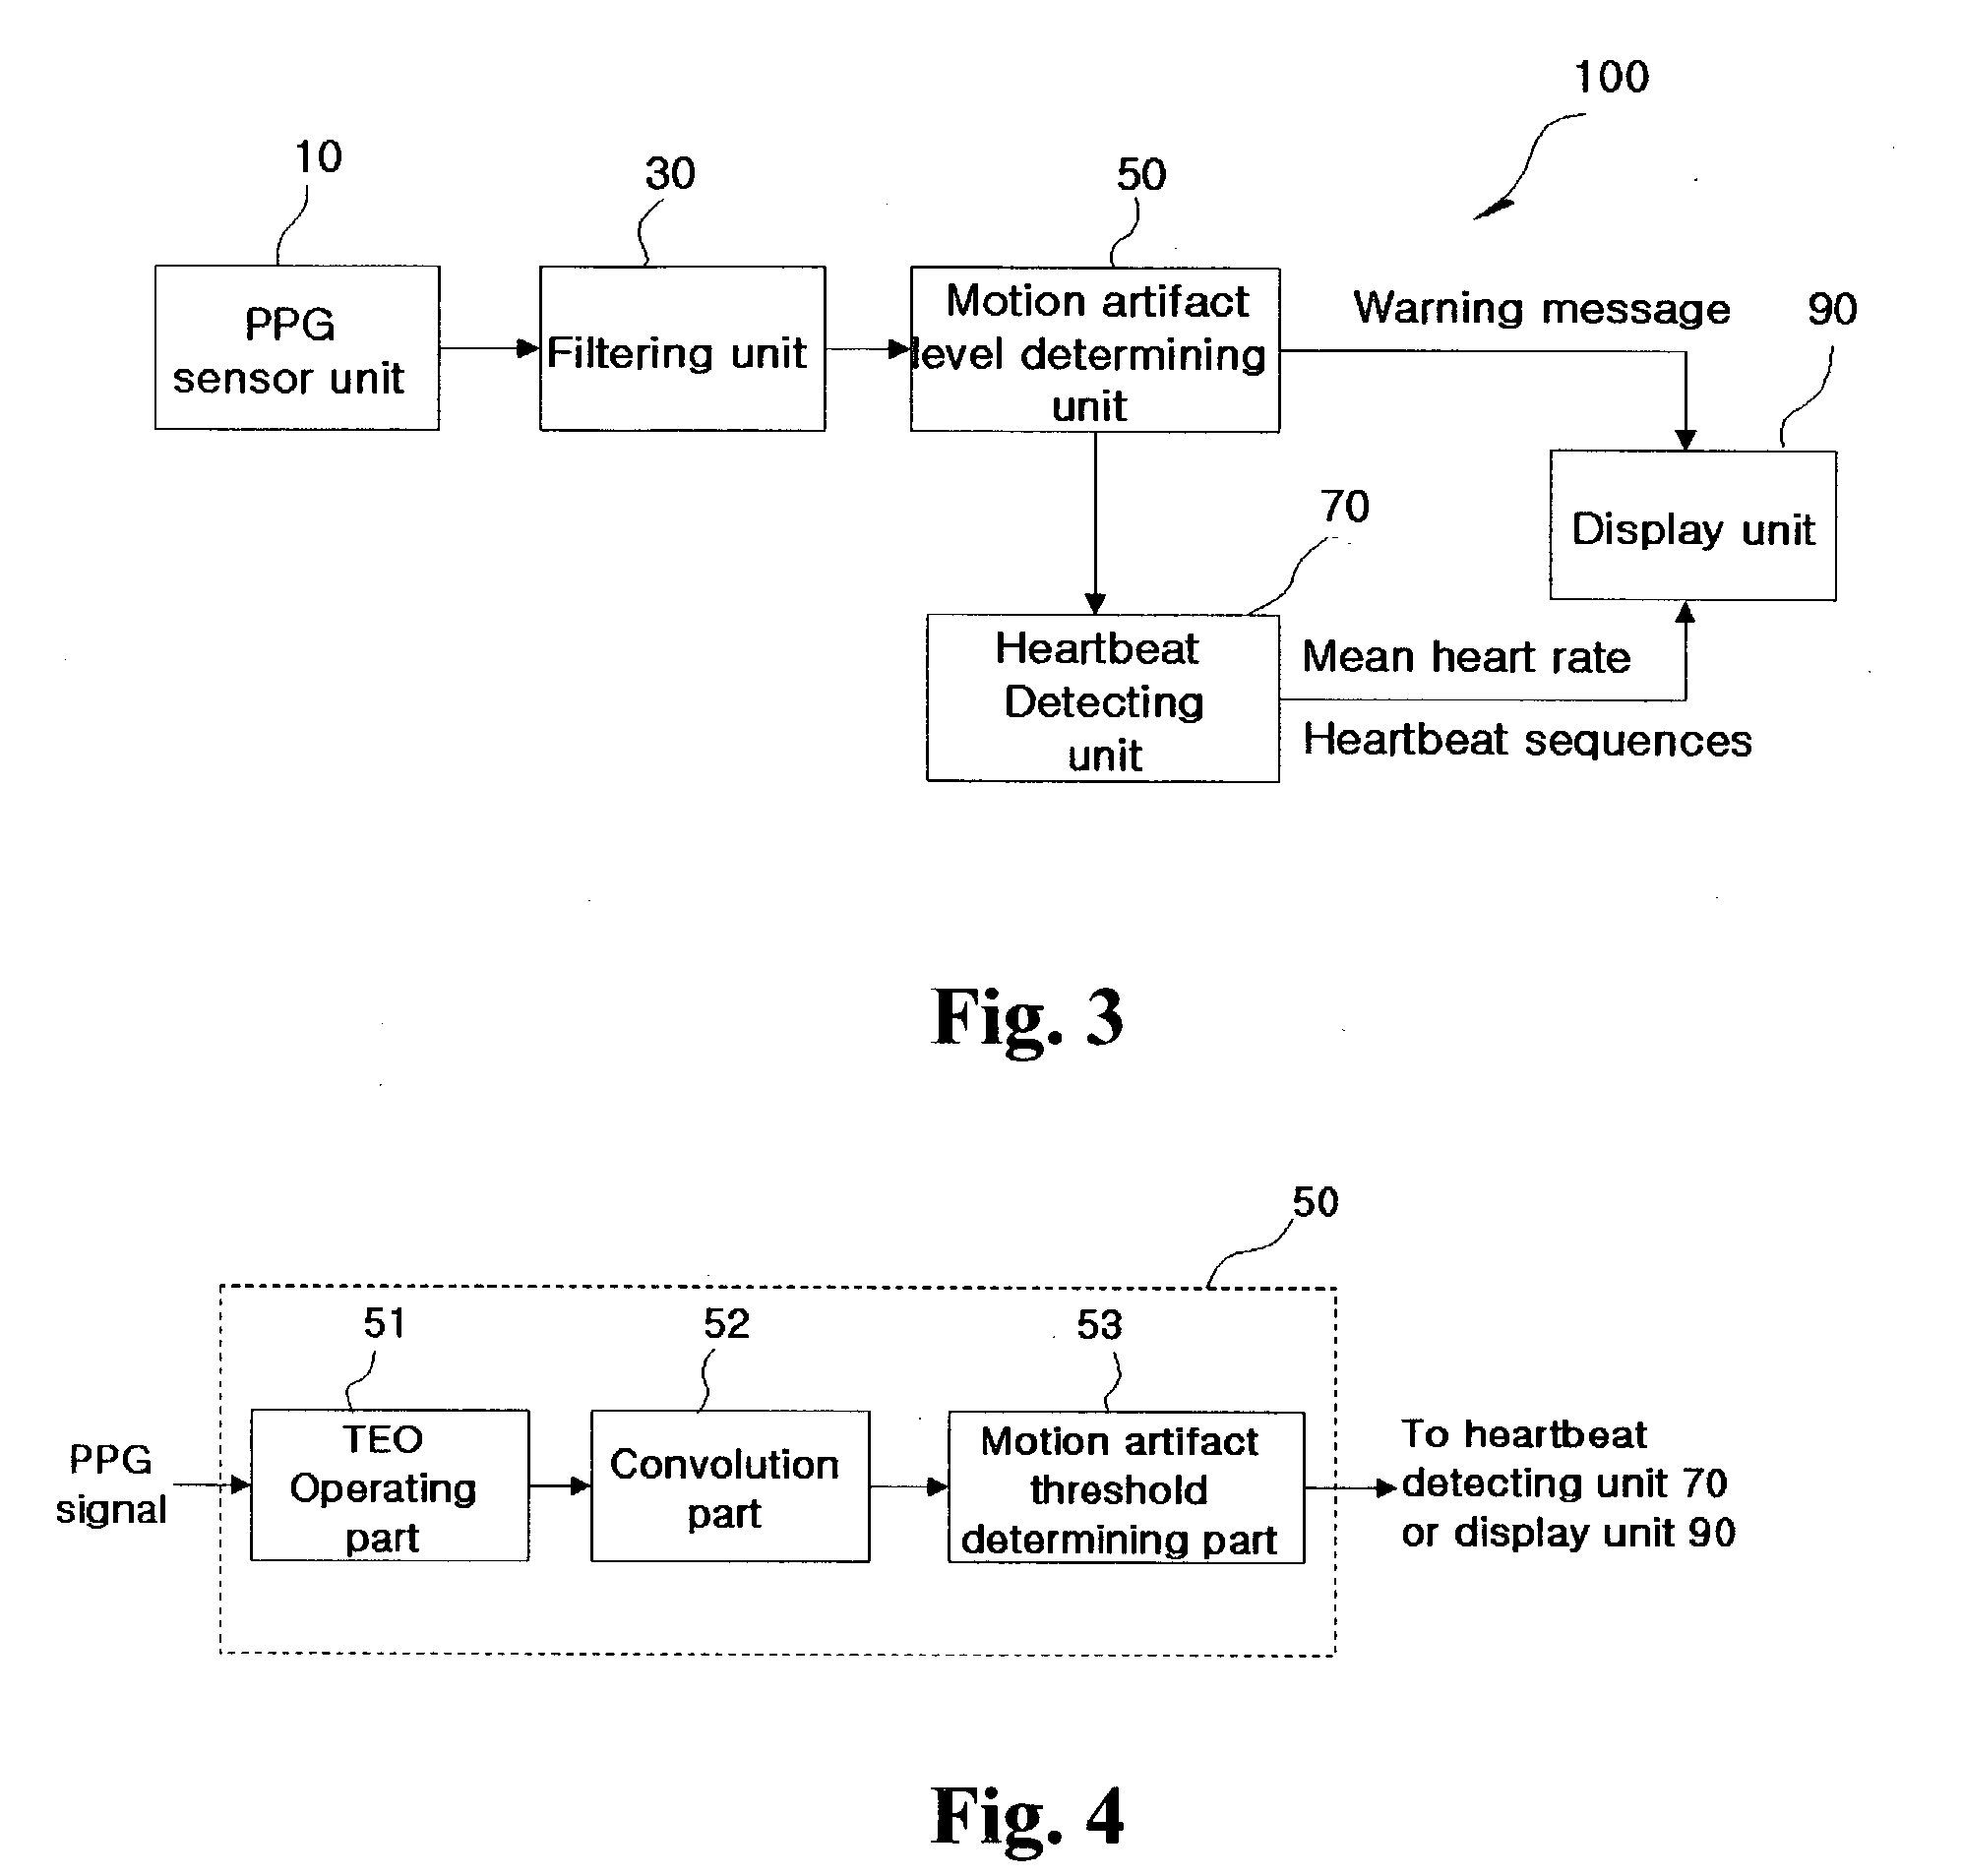 Apparatus and method for detecting heartbeat using PPG